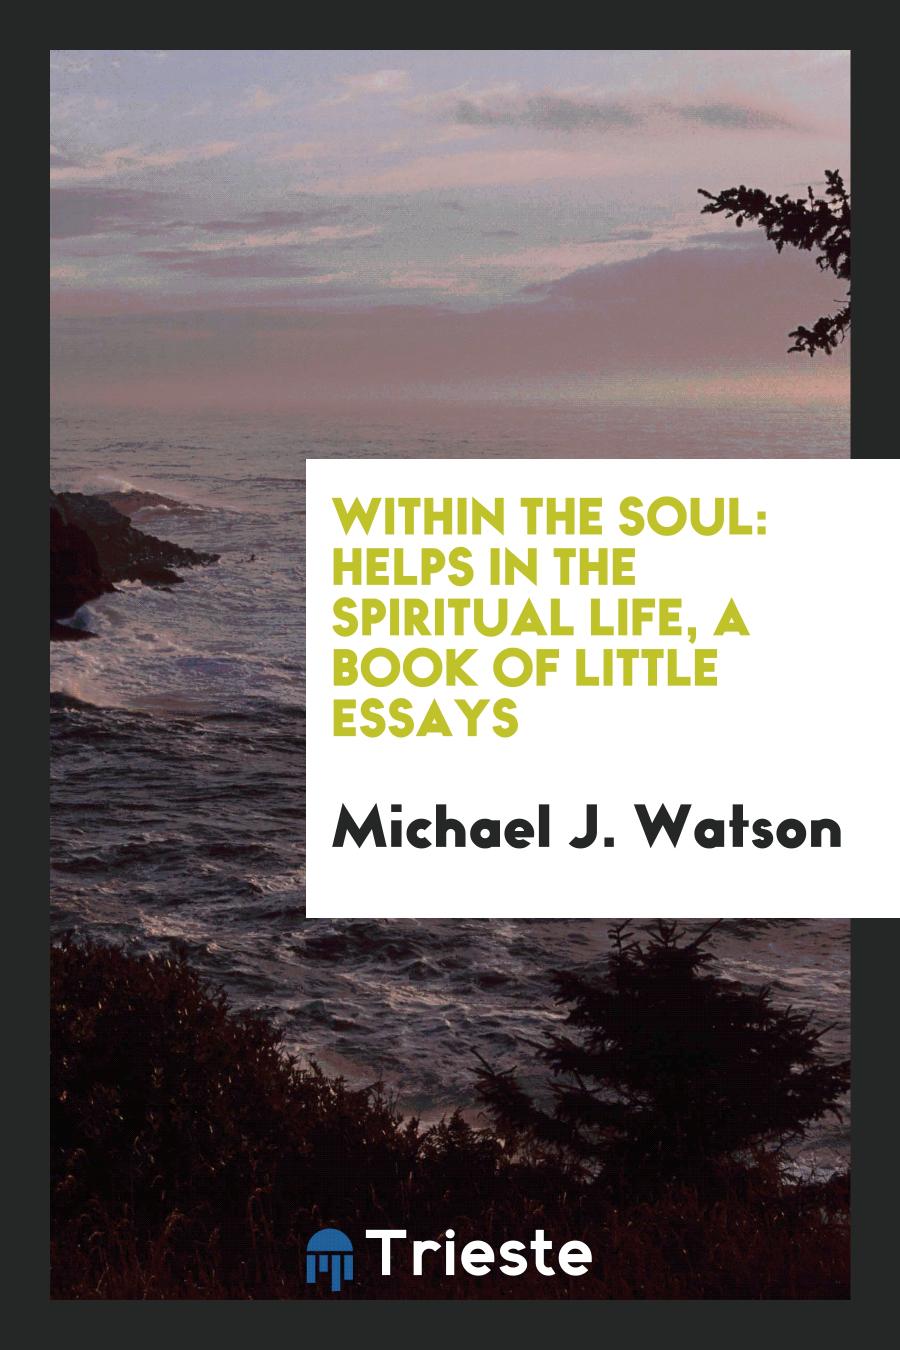 Within the soul: helps in the spiritual life, a book of little essays